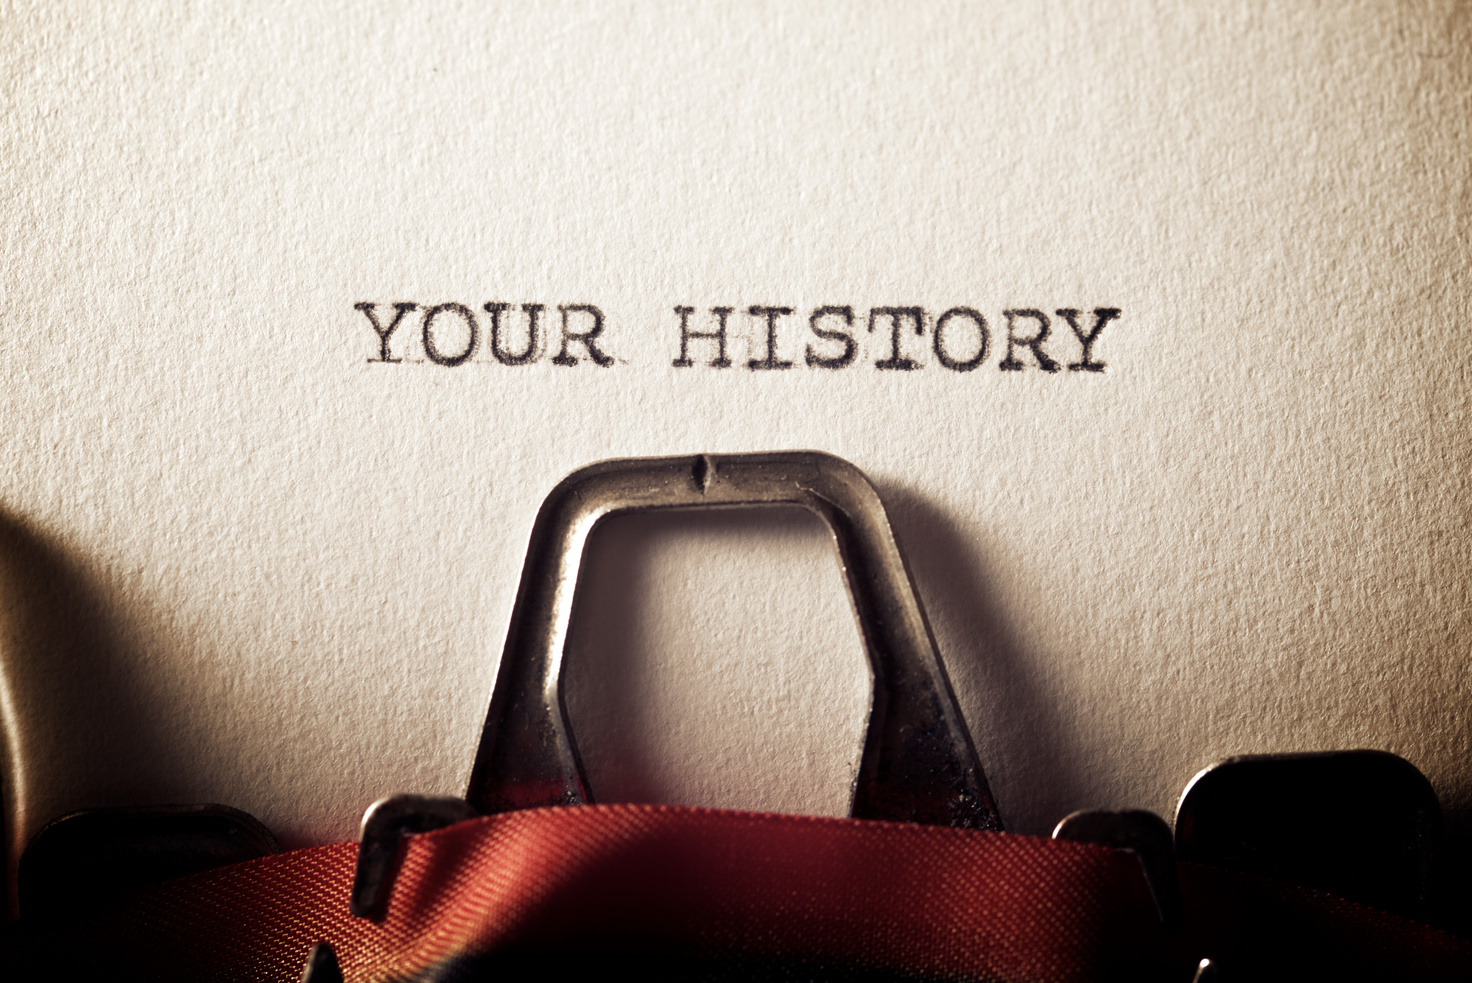 Your history